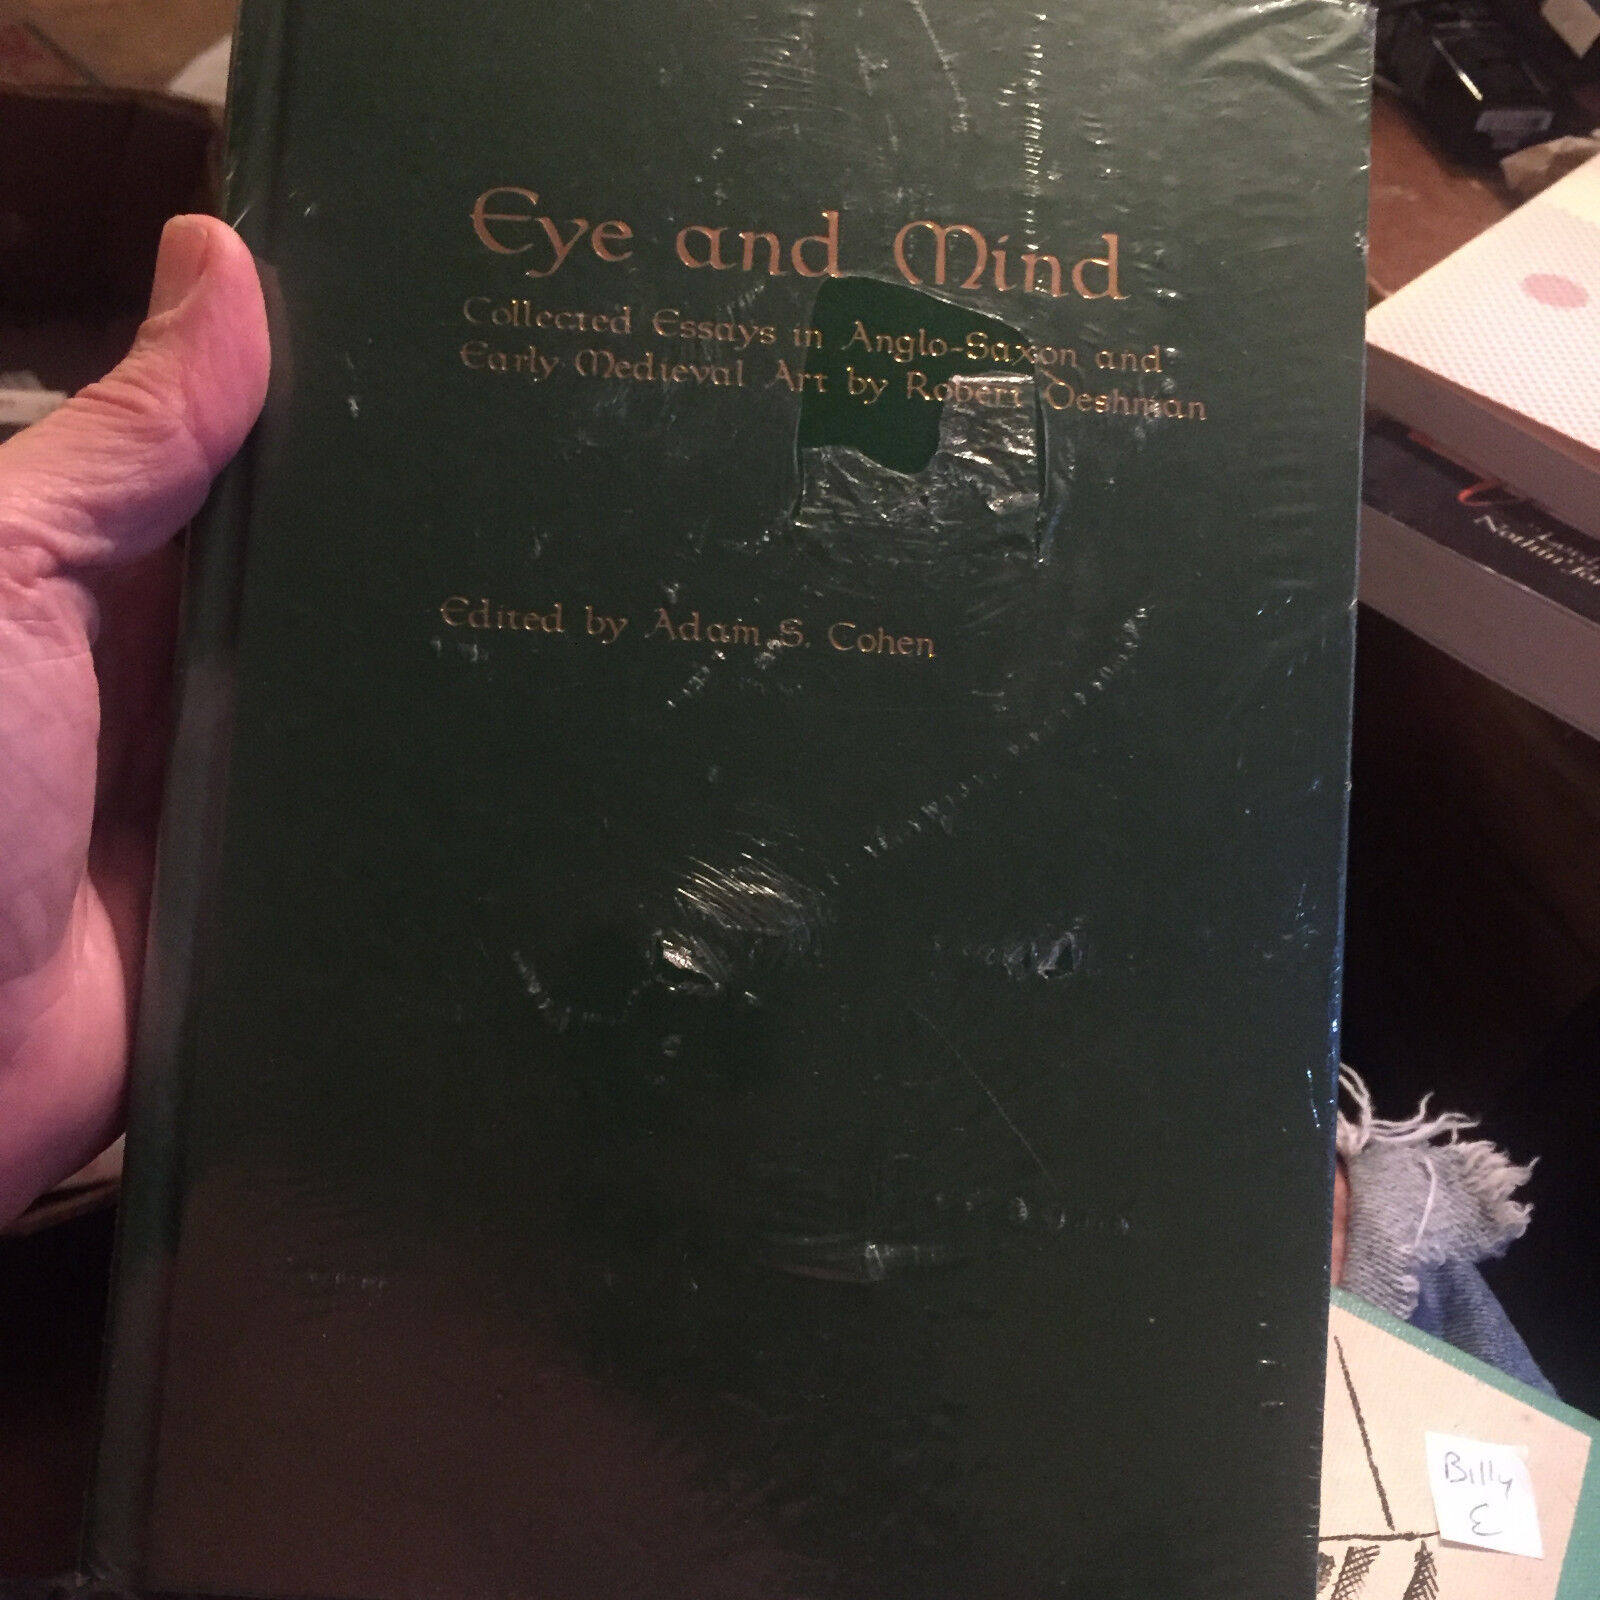 Eye and Mind Collected Essays in Anglo-Saxon and Early Medieval... new book